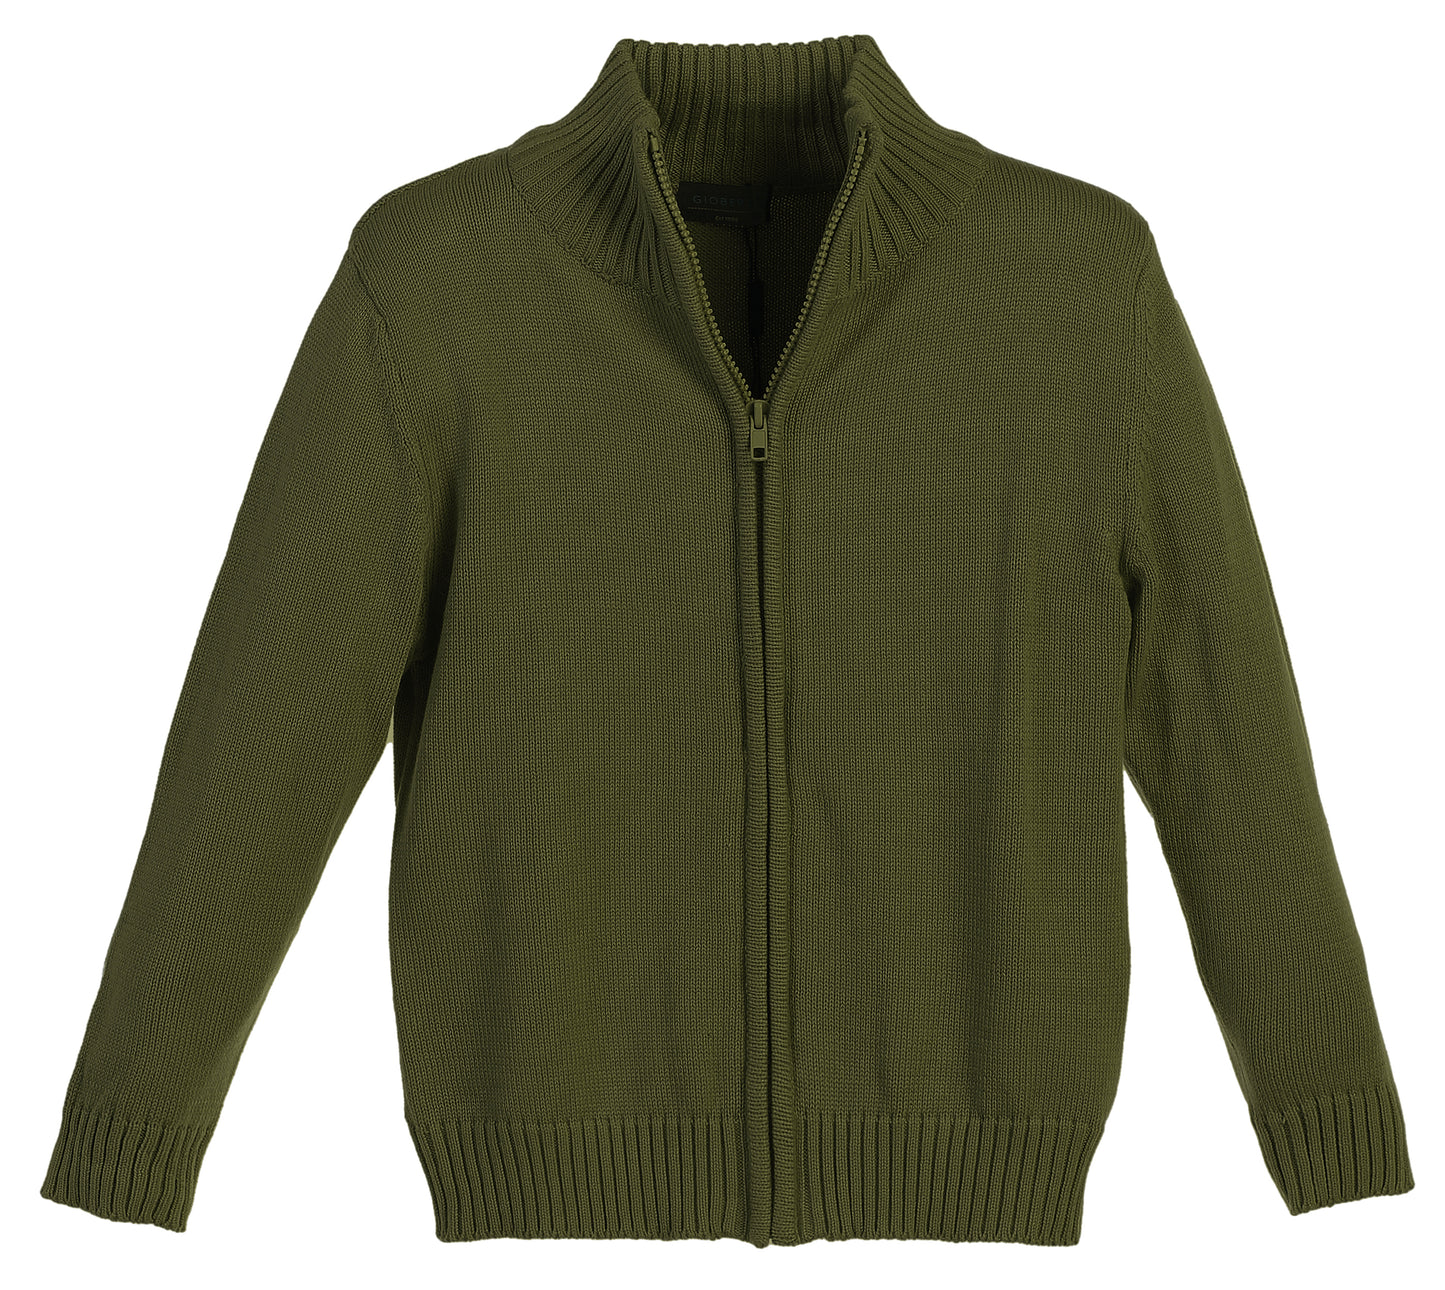 Knitted Full Zip 100% Cotton Sweater - Olive